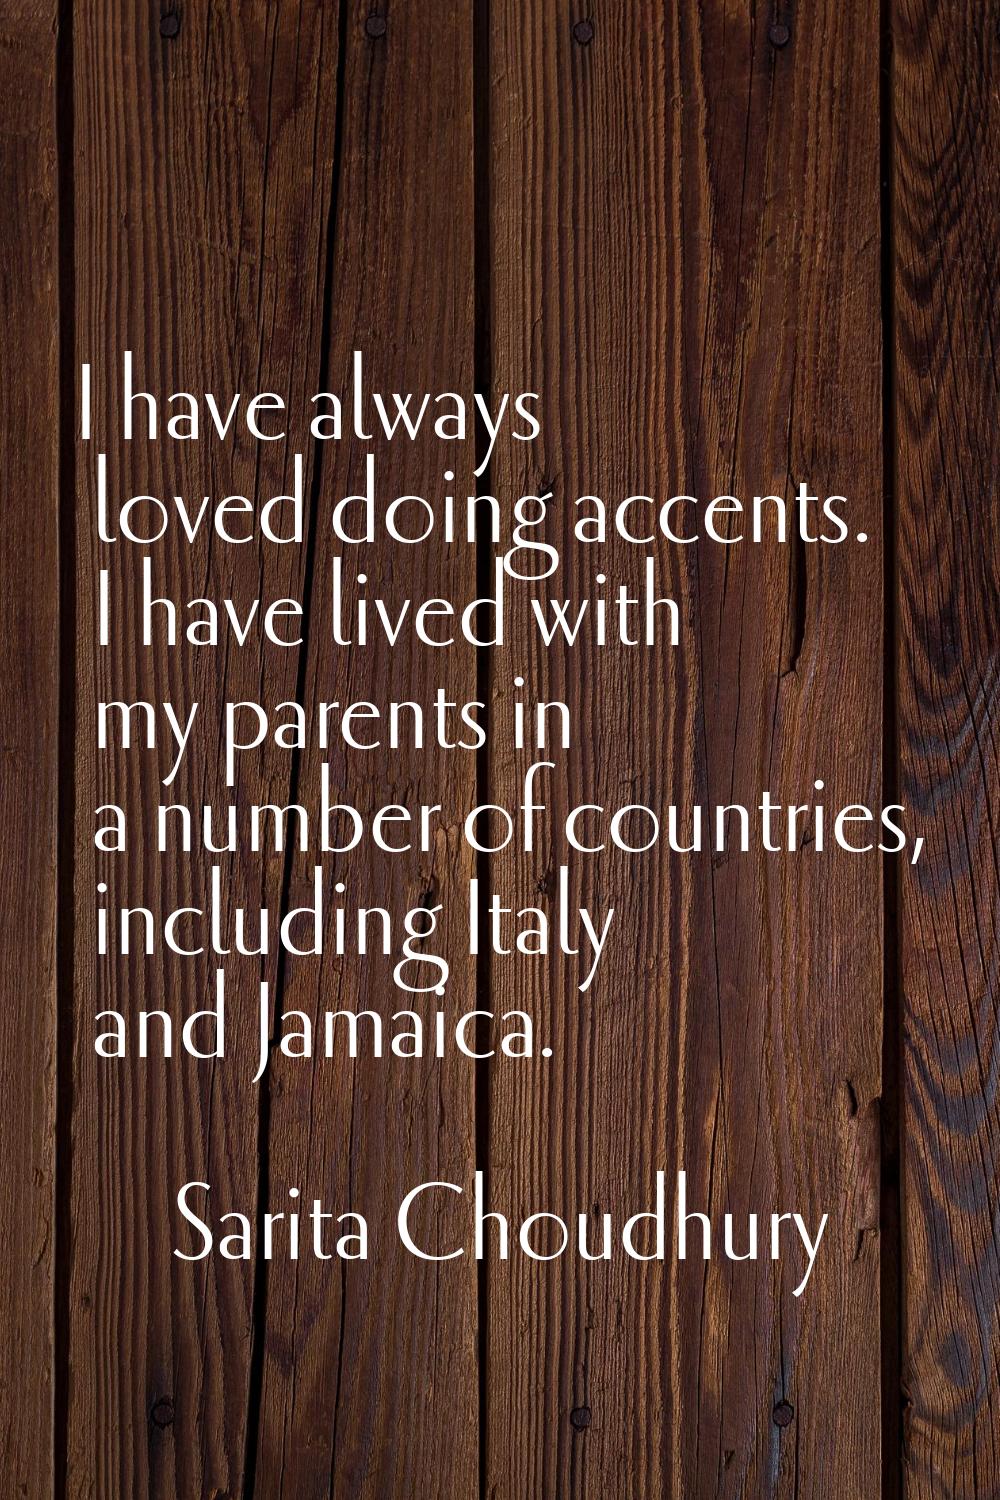 I have always loved doing accents. I have lived with my parents in a number of countries, including